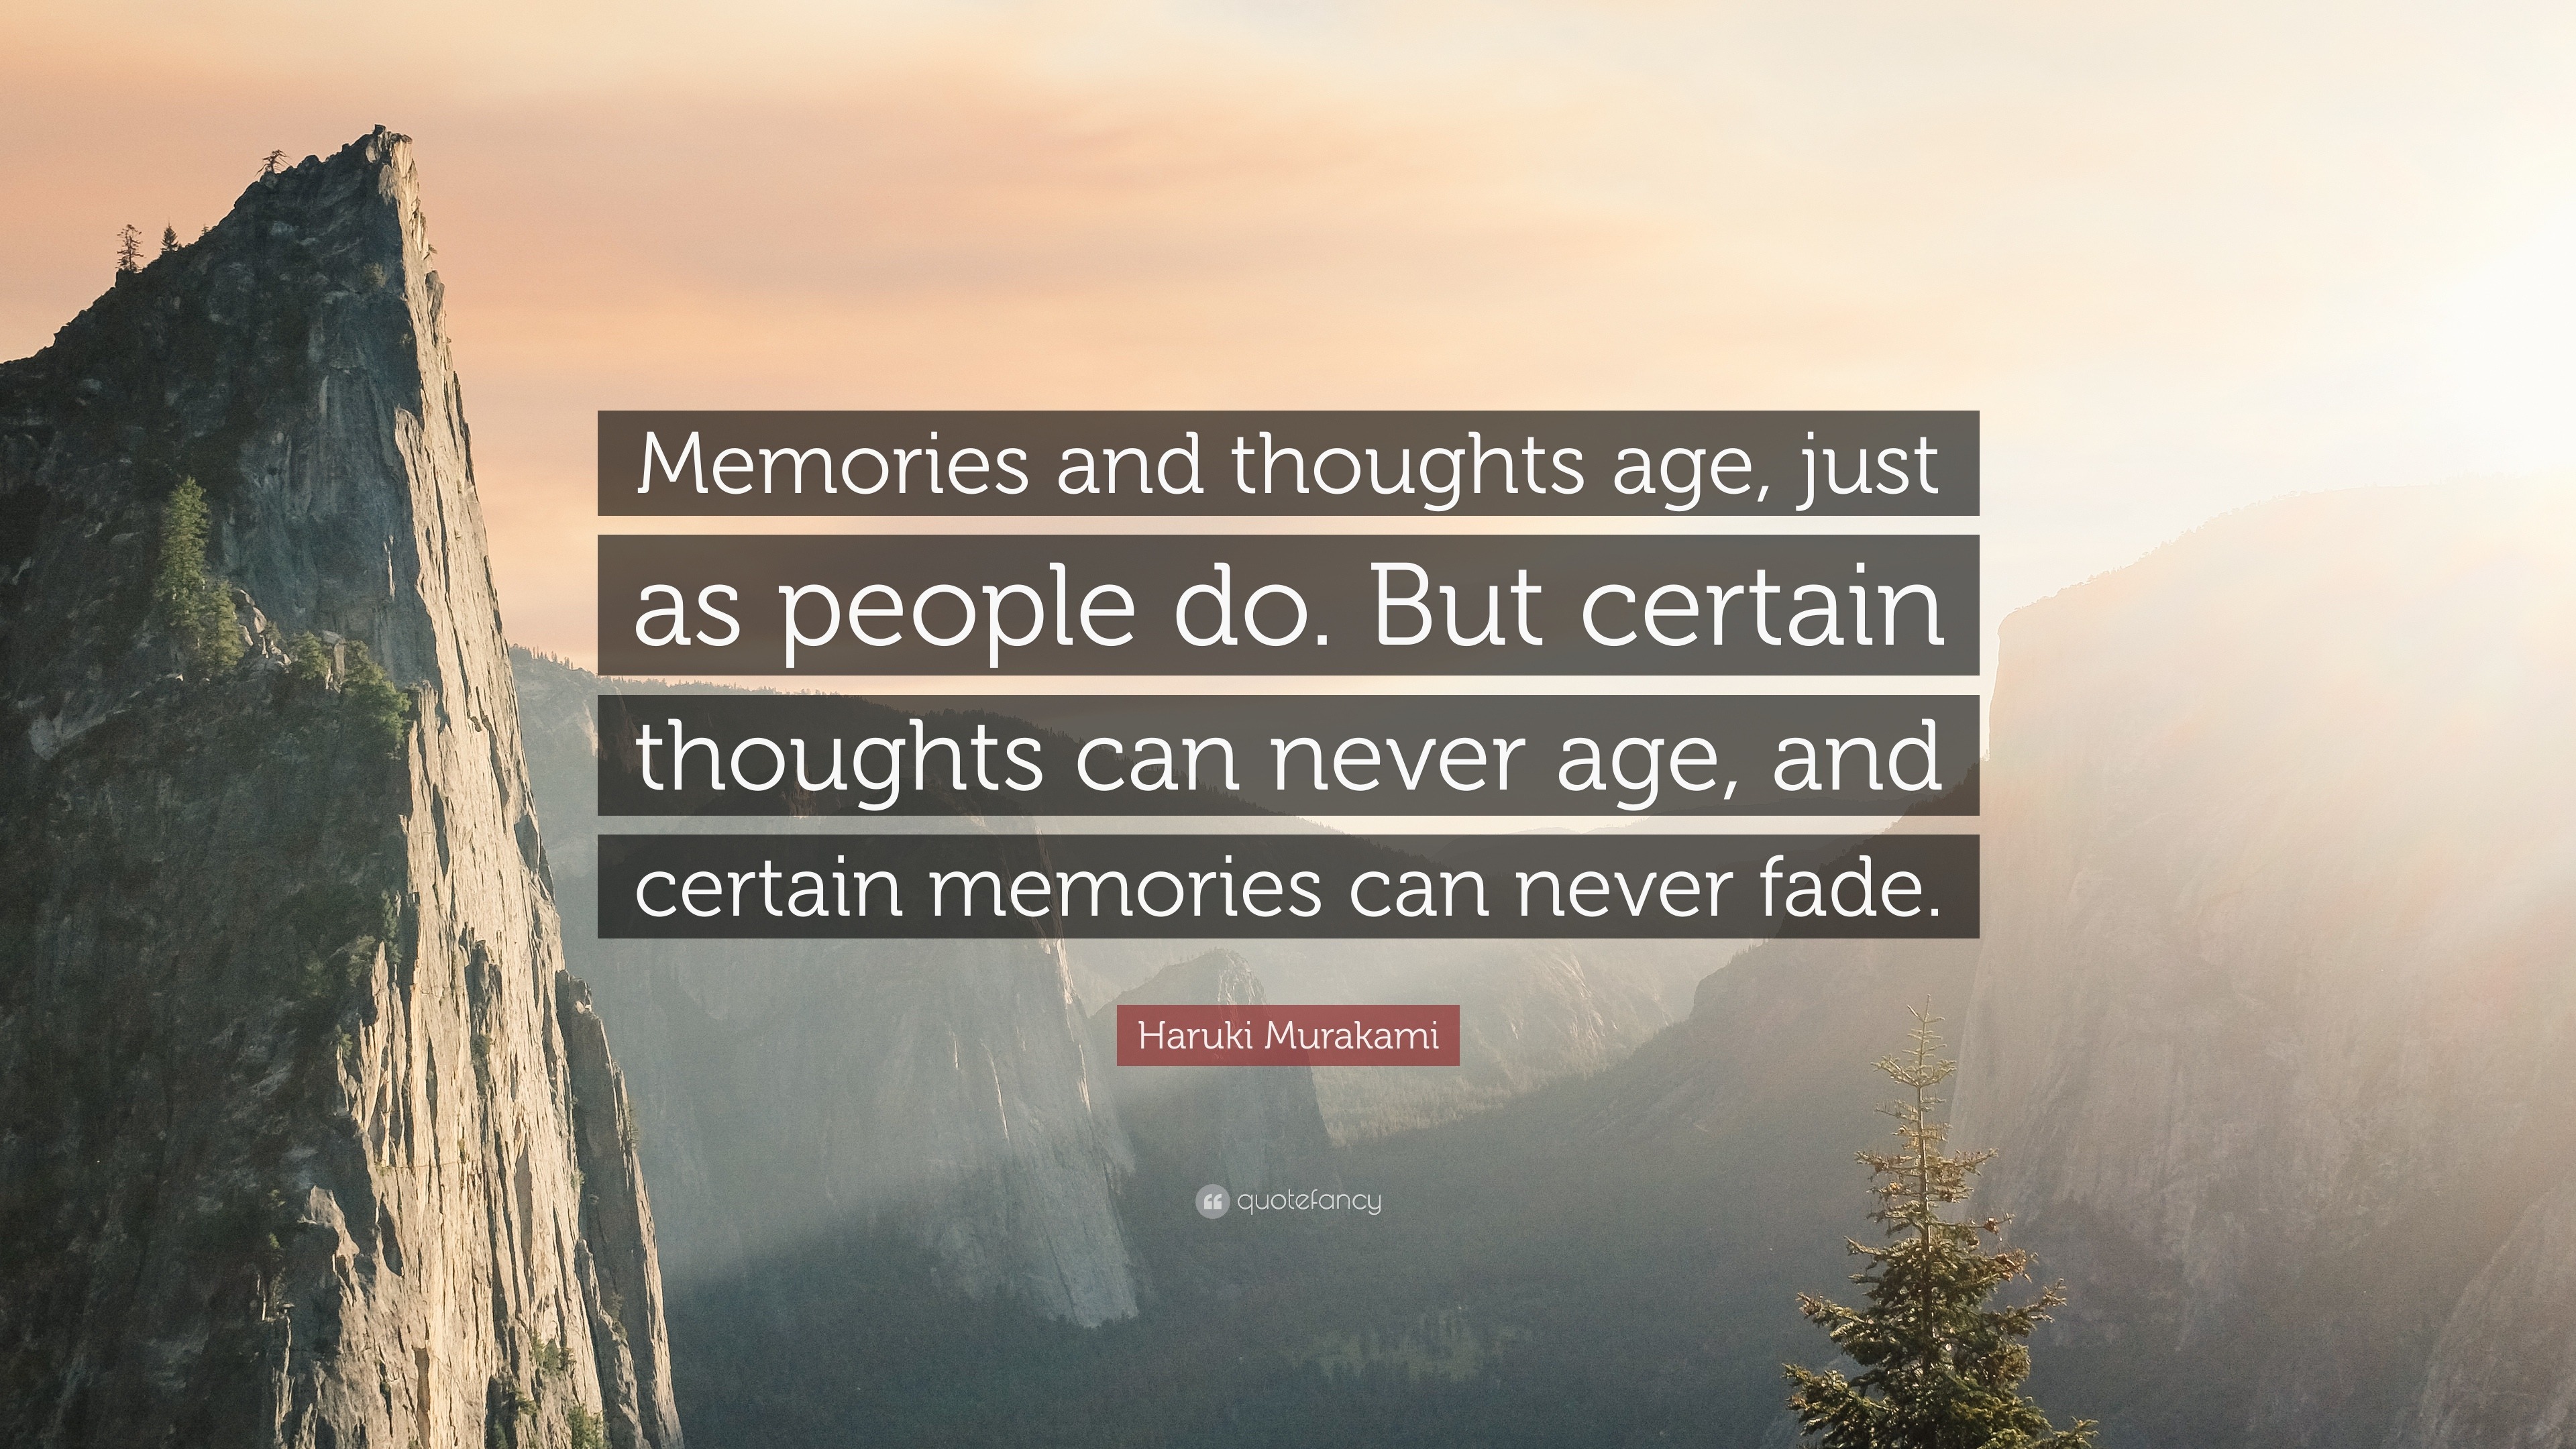 Haruki Murakami Quote: “Memories and thoughts age, just as people do